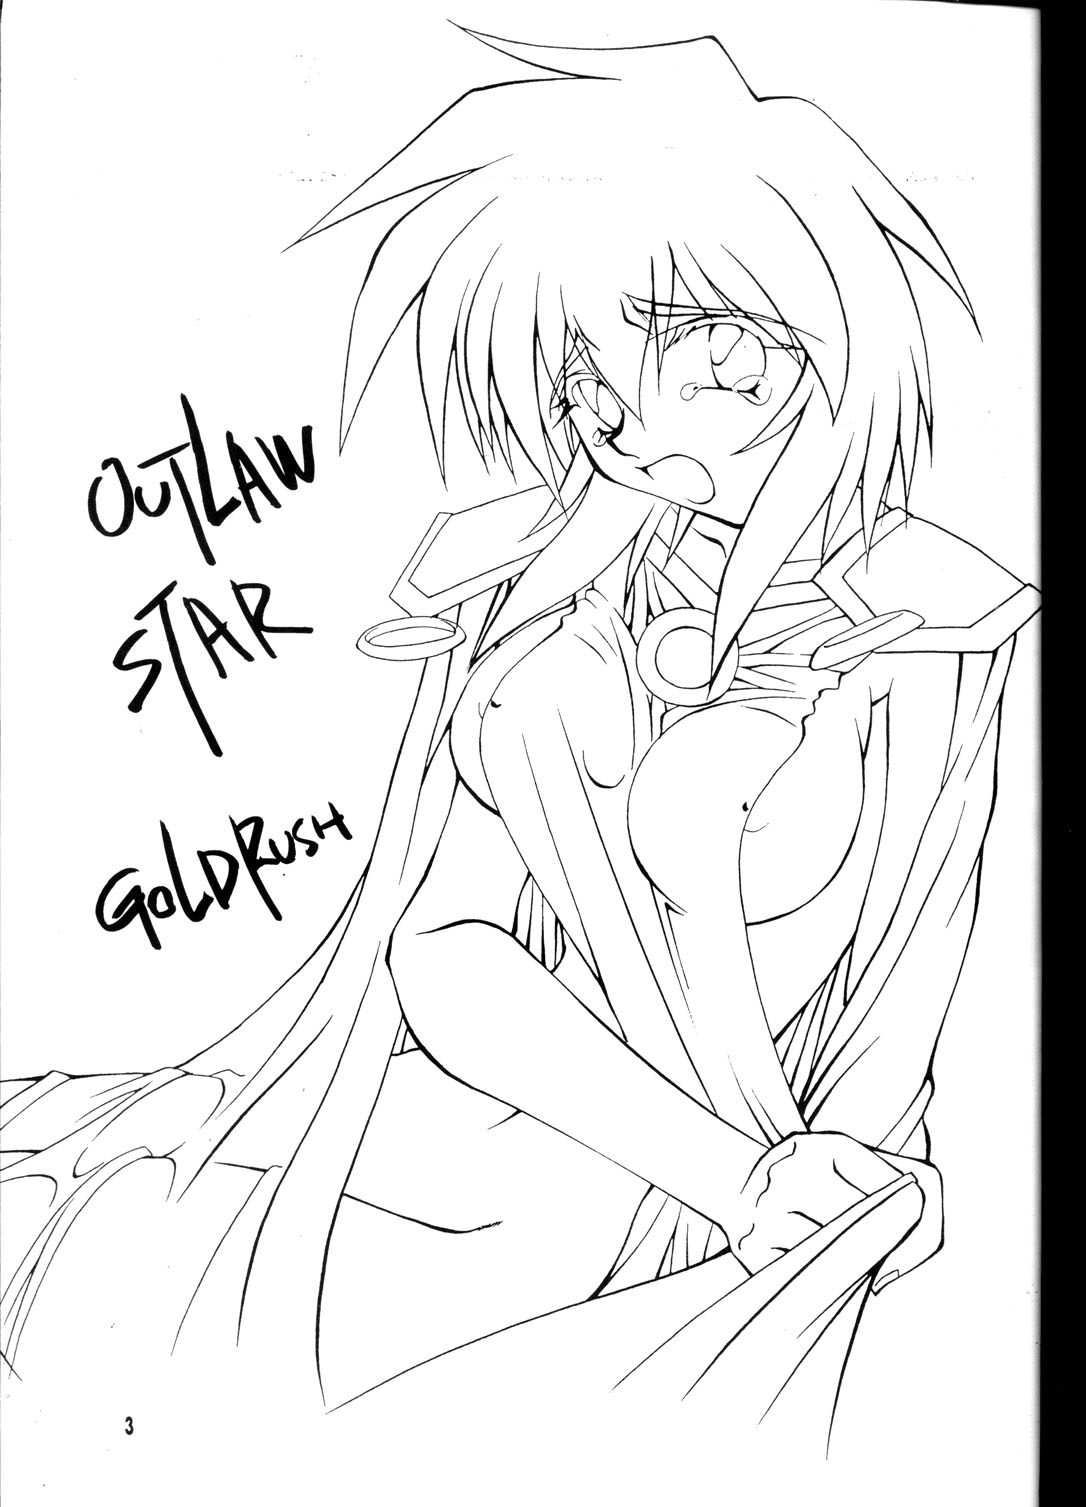 [GOLD RUSH] OUTLAW STAR (Outlaw Star, All Purpose Cultural Cat Girl Nuku Nuku, Slayers) 